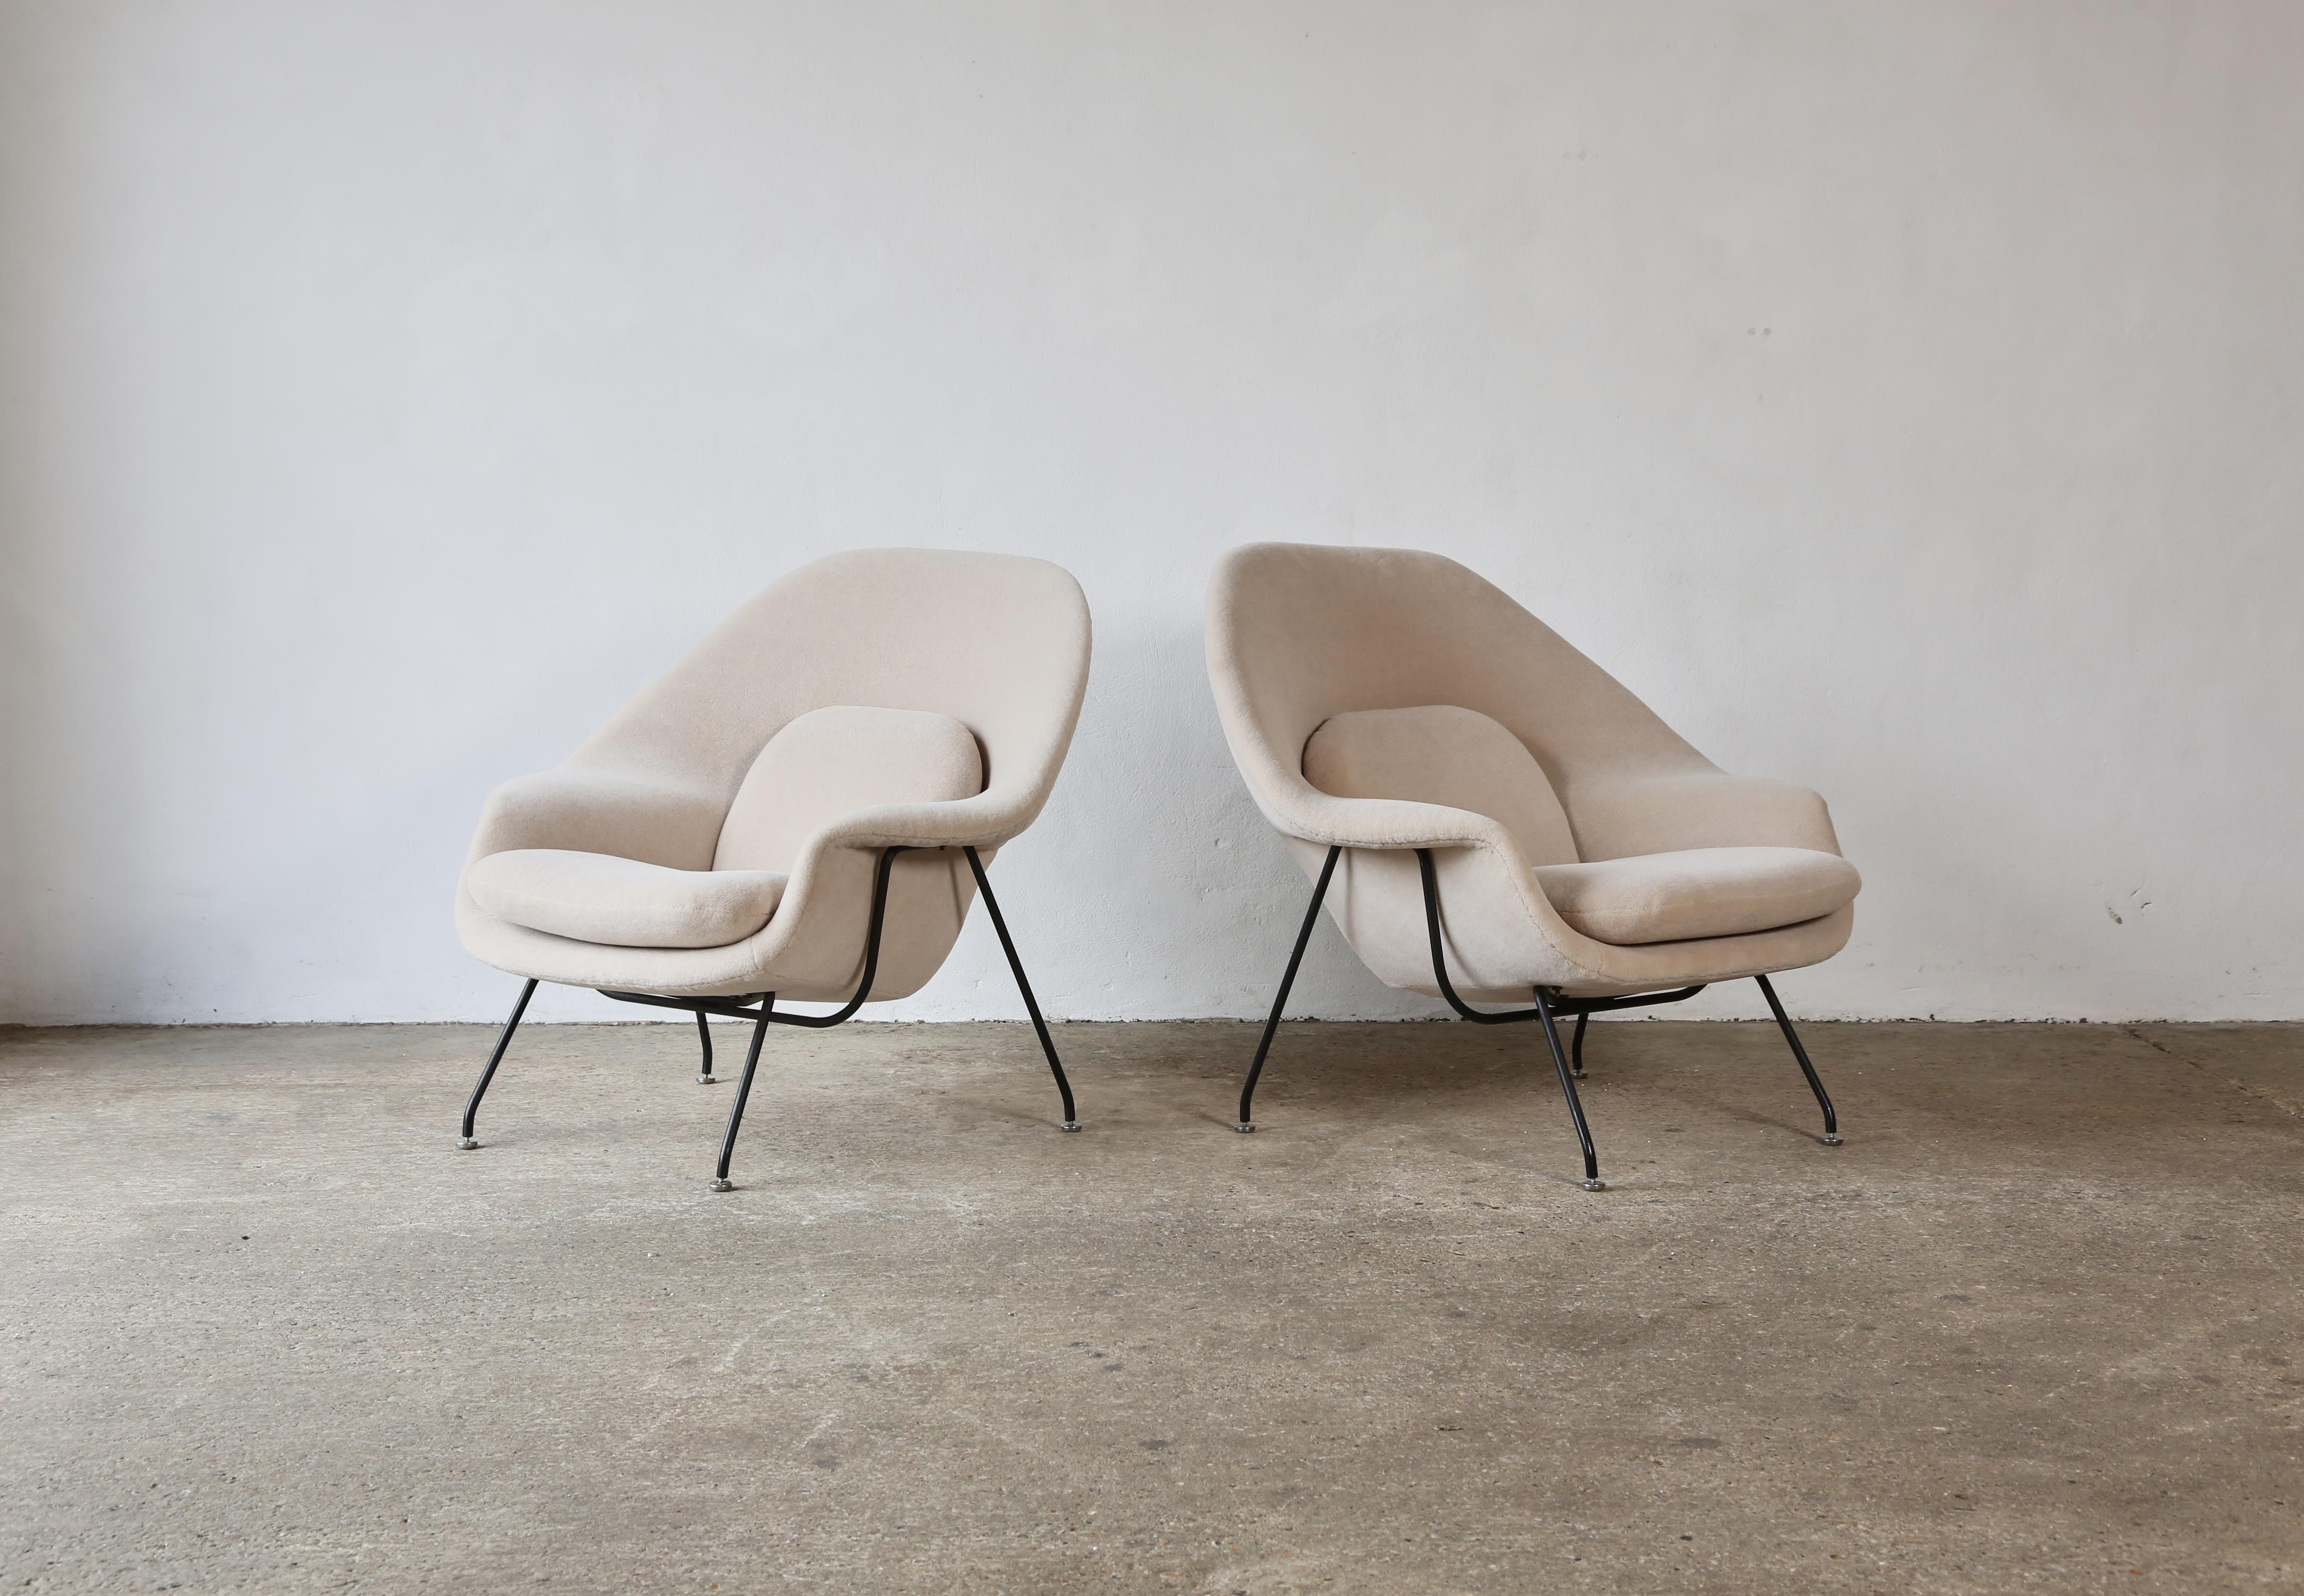 20th Century Rare Early Pair of Eero Saarinen Womb Chairs and Ottomans, Knoll, USA, 1950s For Sale